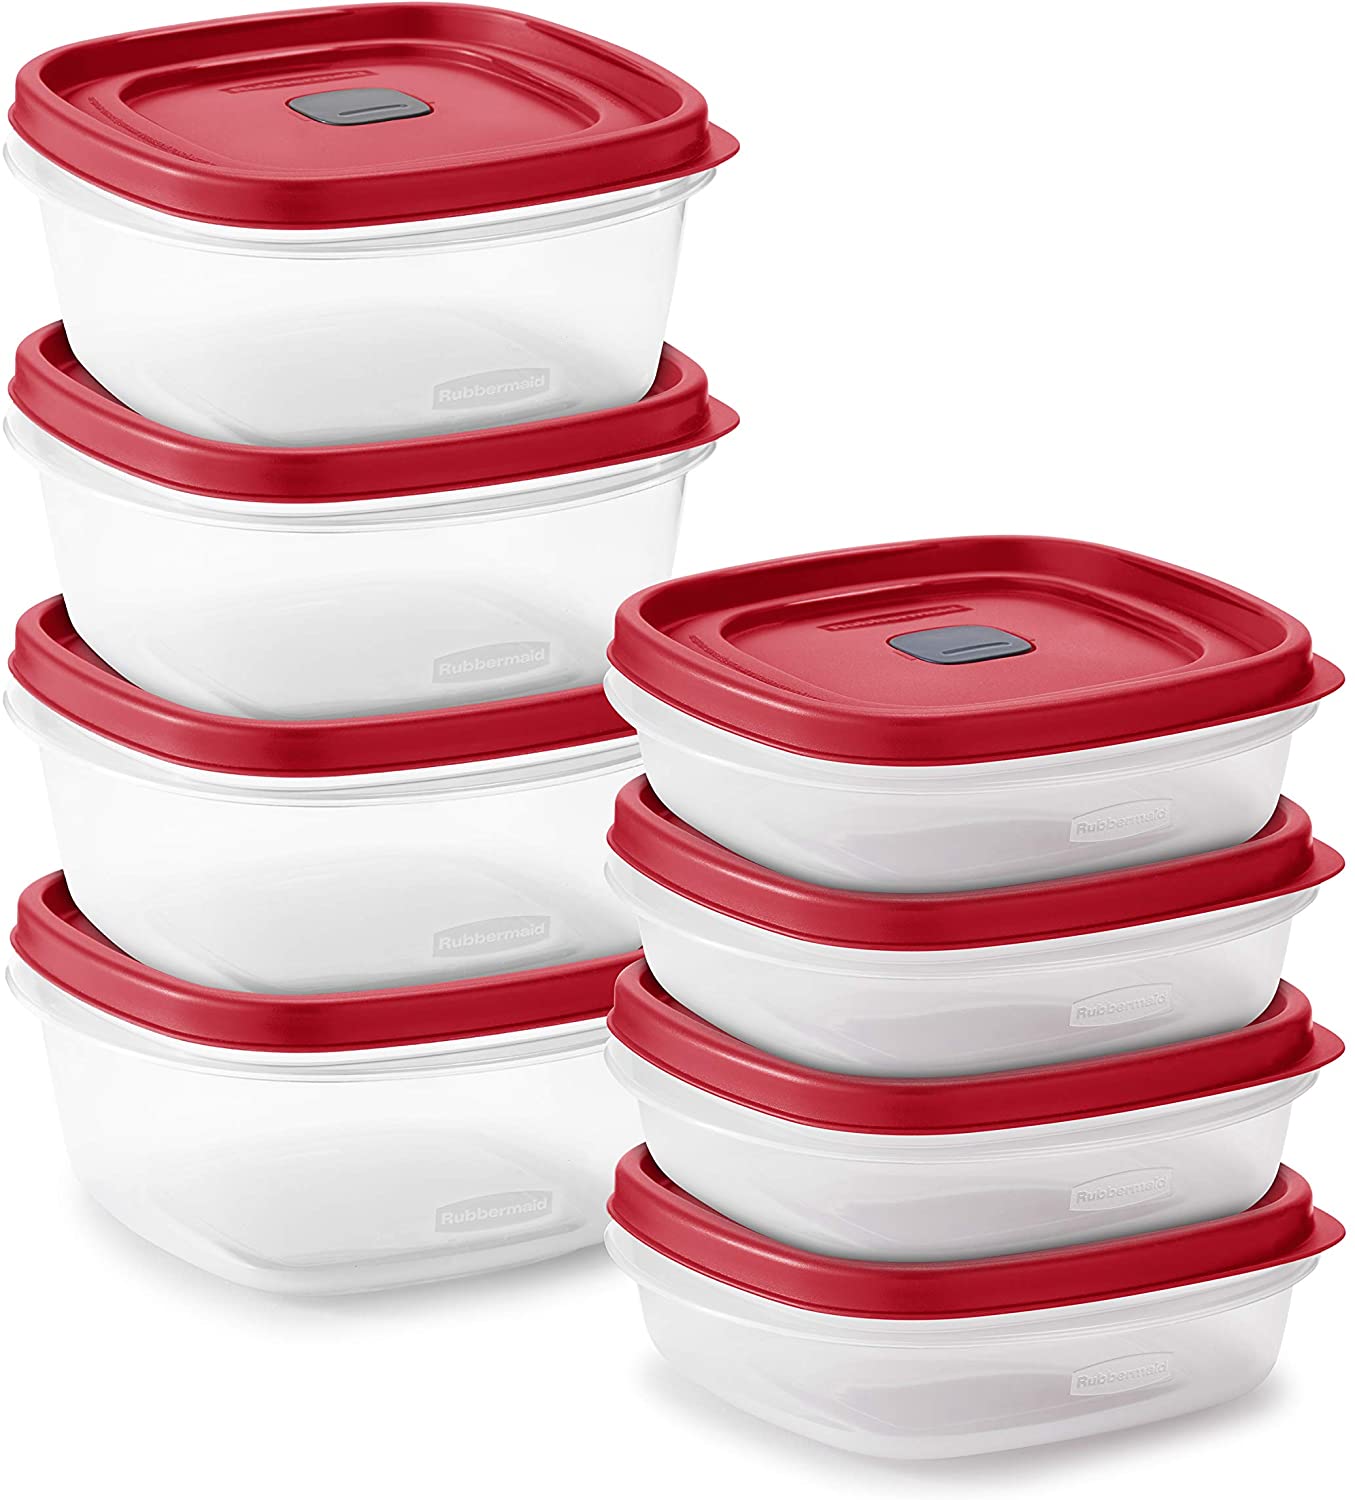 Rubbermaid Easy Find Vented Lids Food Storage, Set of 8 (16 Pieces Total)